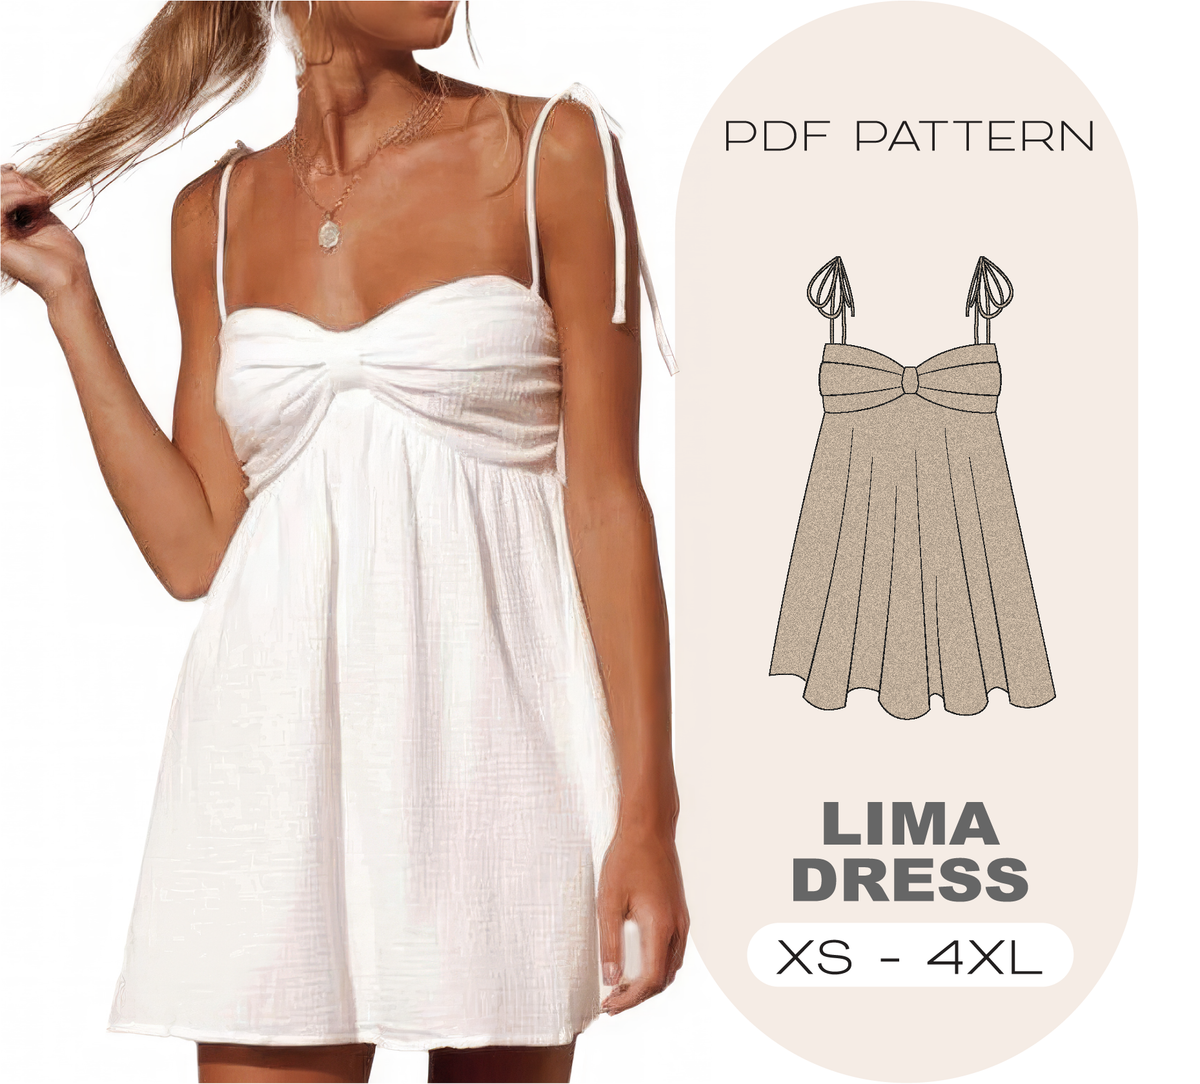 LIMA Flared Mini Dress Sewing Pattern in 8 Sizes XS-4XL, Instant Download